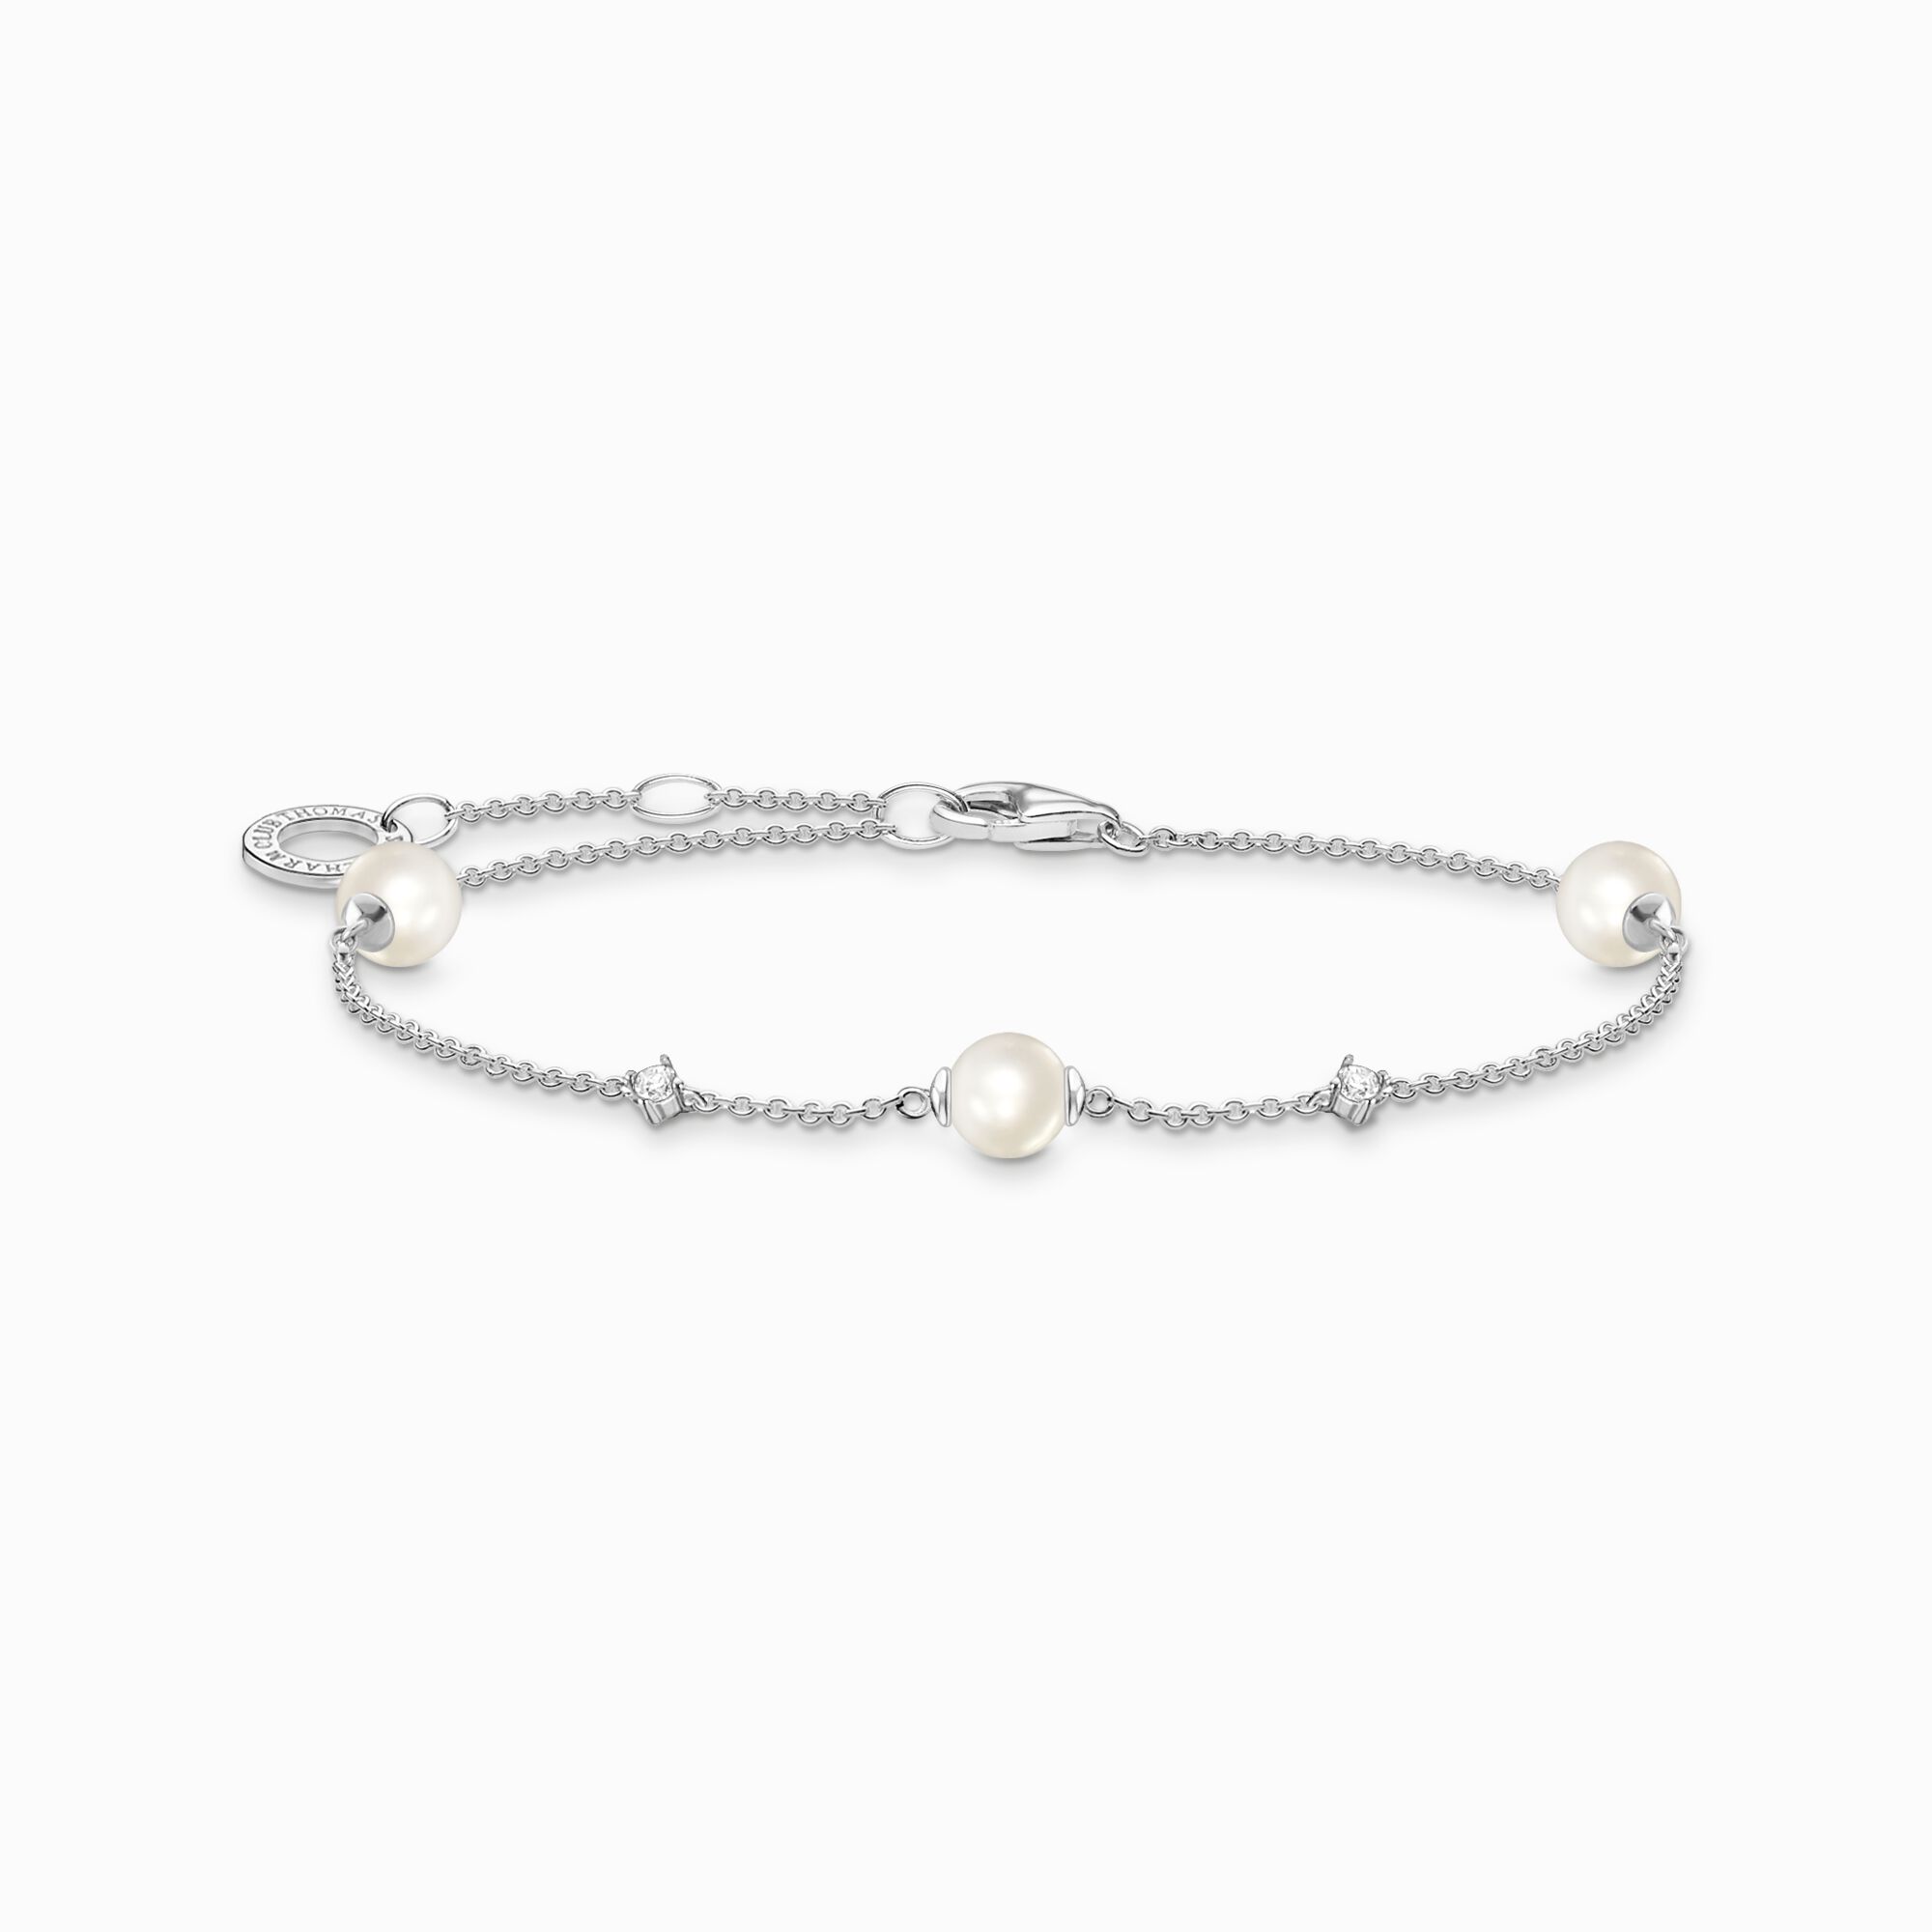 Bracelet pearls with white stones silver from the Charming Collection collection in the THOMAS SABO online store